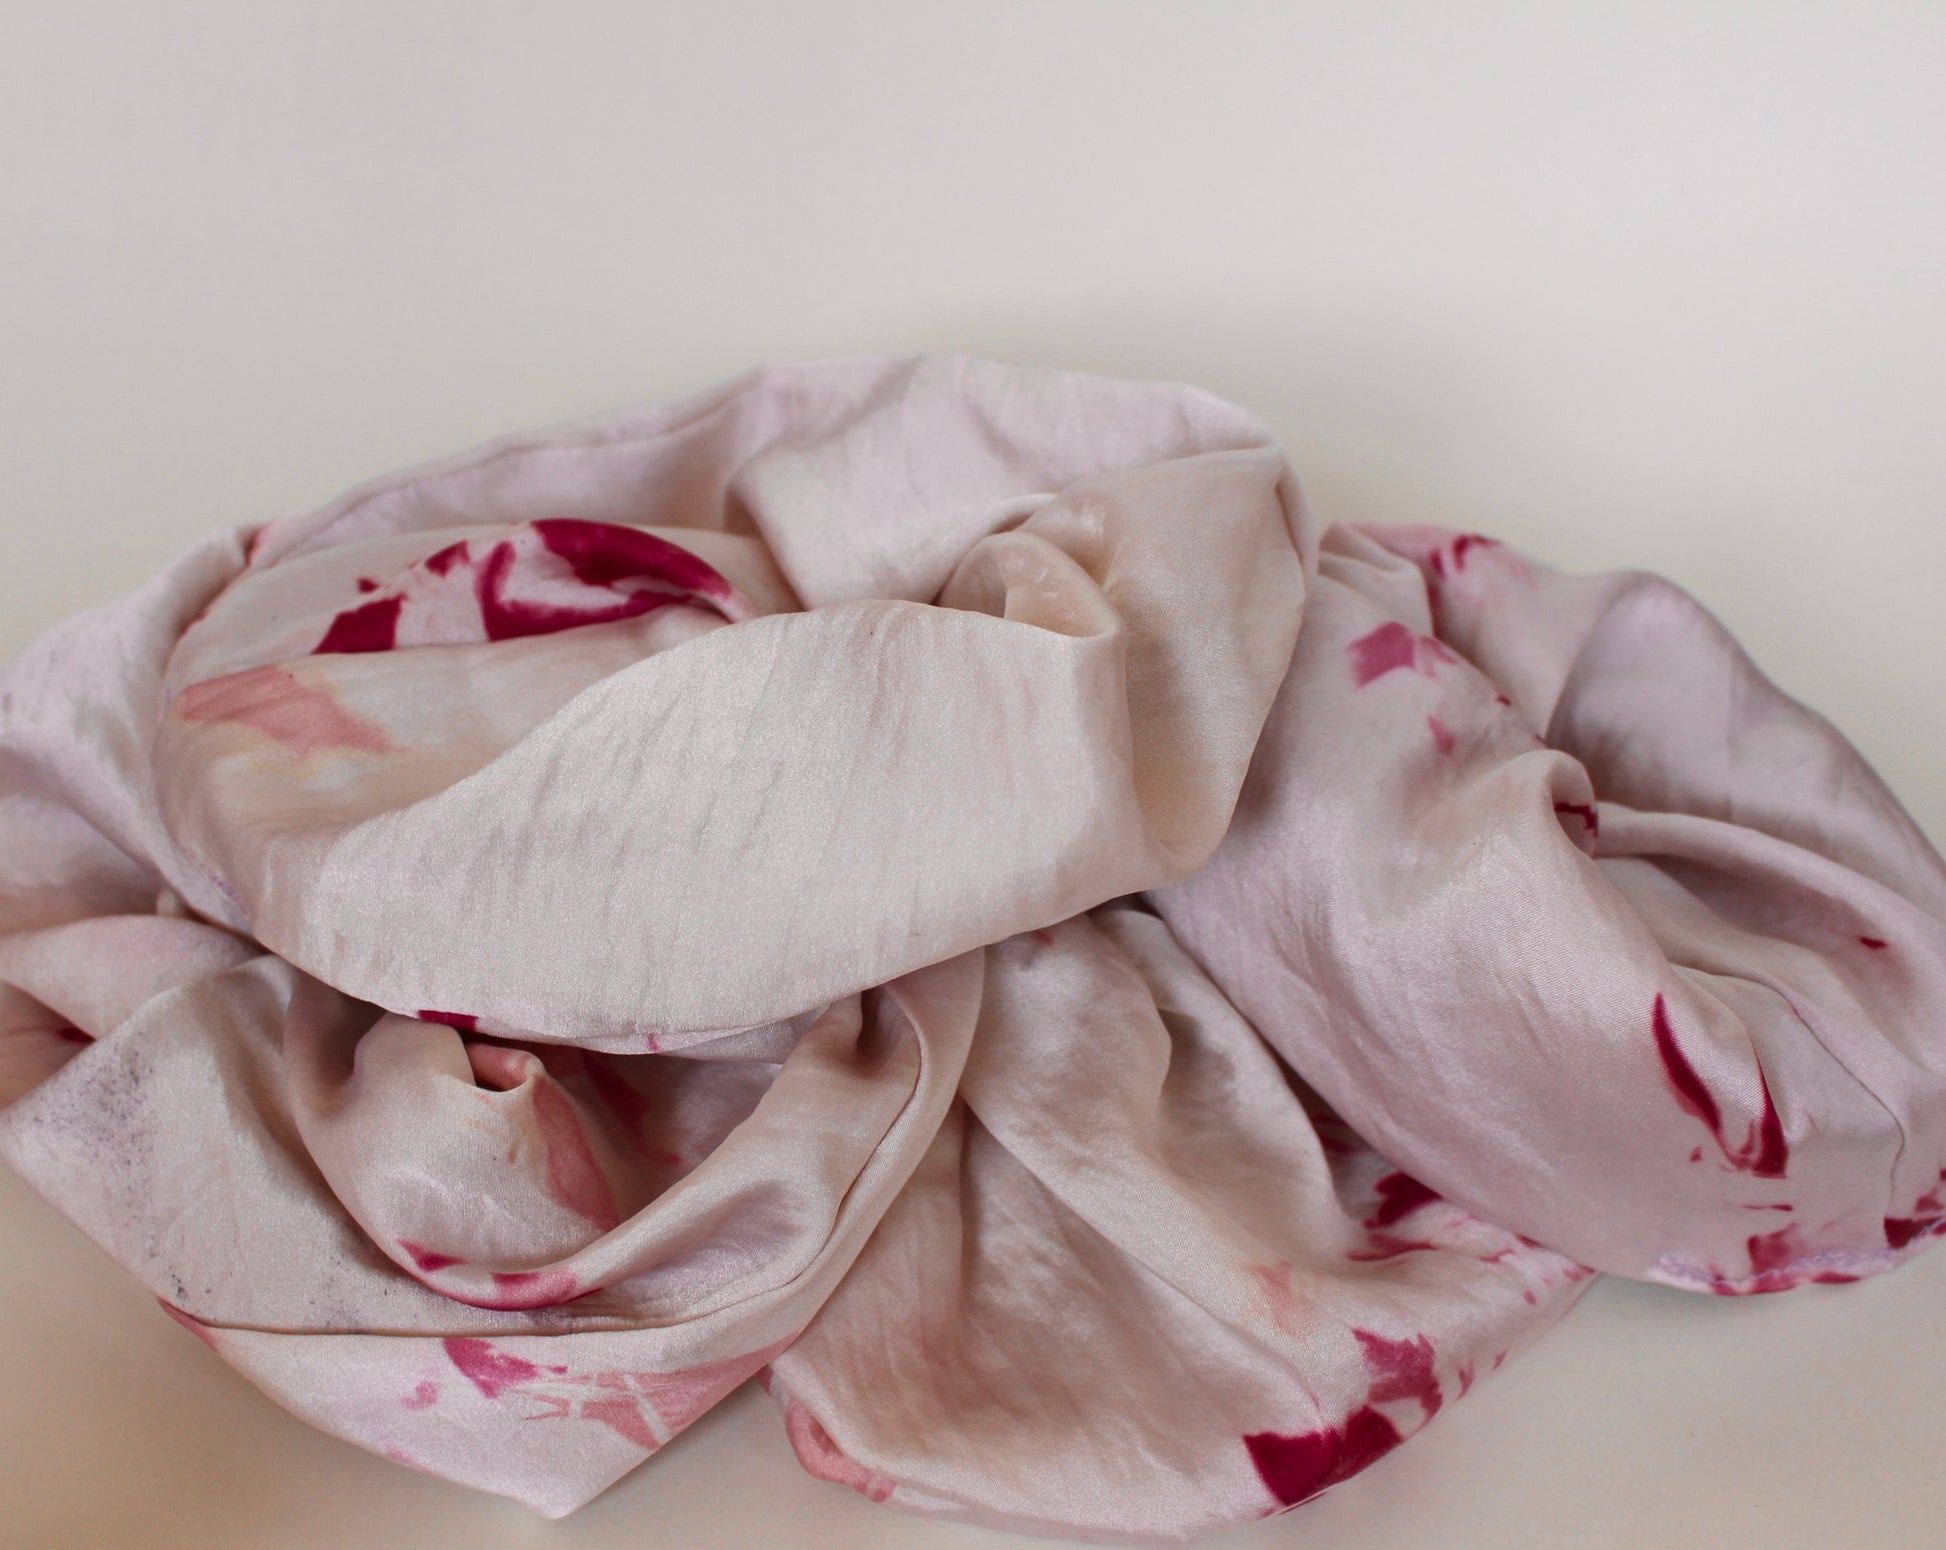 Goose Summer is a small, sustainable plant dyeing business making naturally dyed silk scrunchies and other accessories in Los Angeles. Pink tie dyed plant dyed silk scrunchies made by Goose Summer.